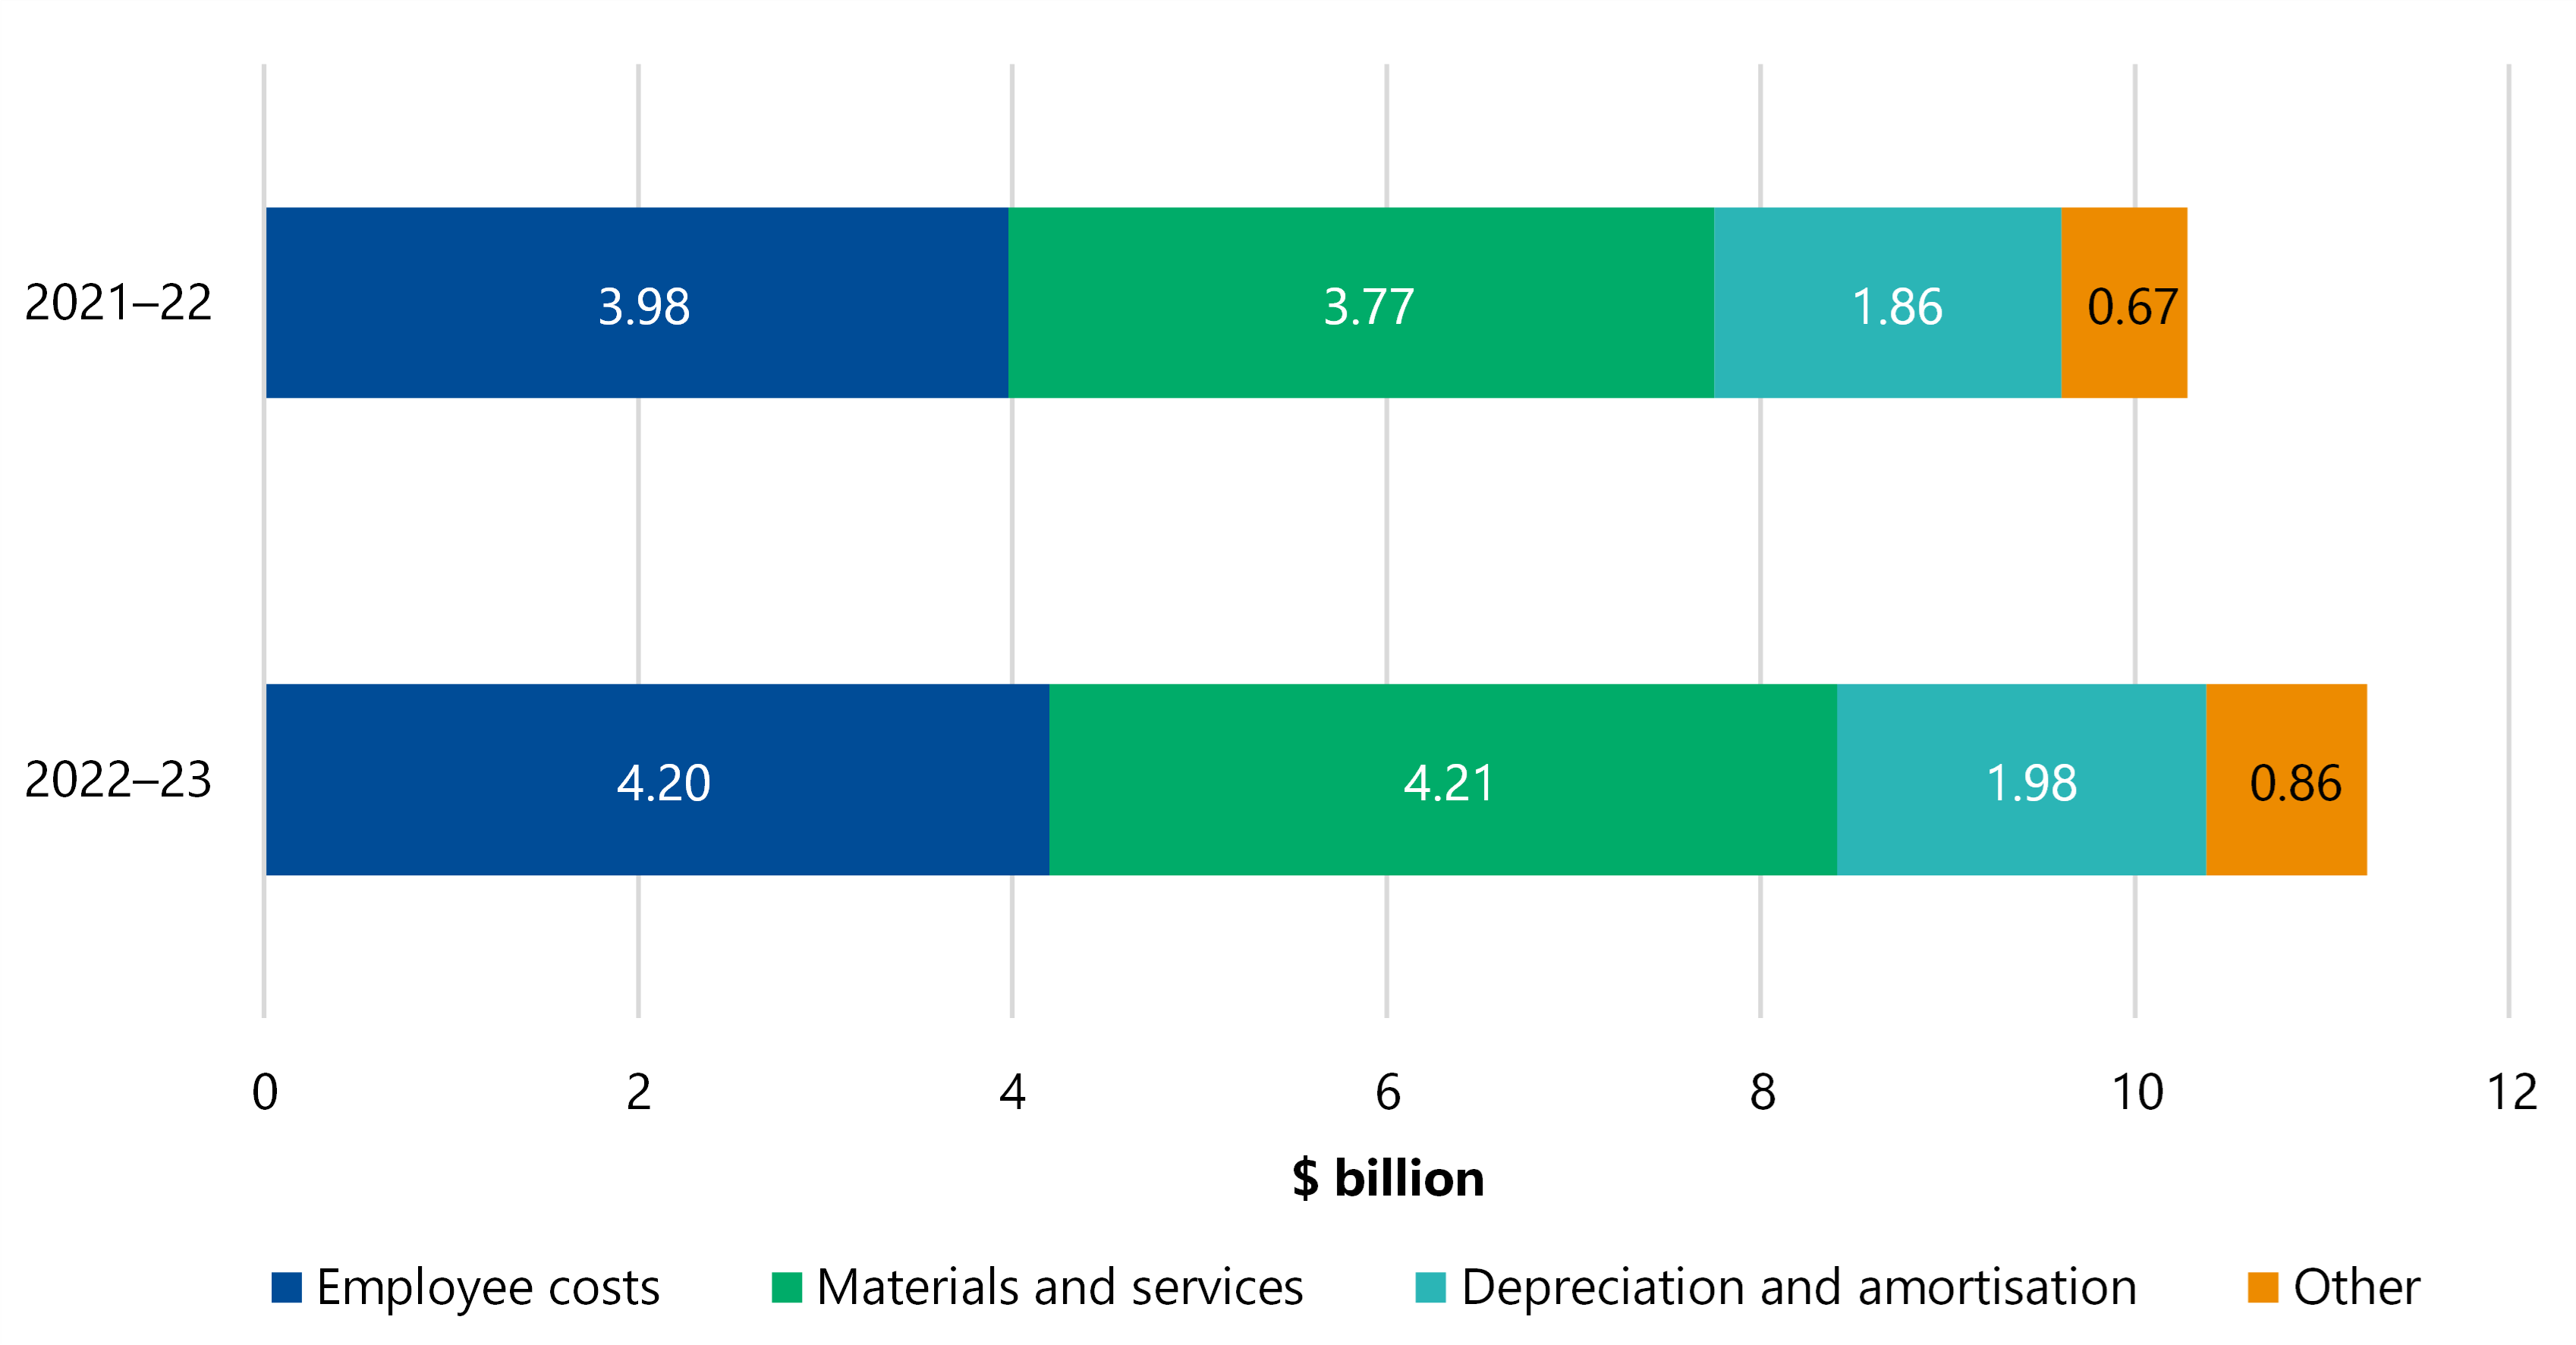 Figure 9 is a stacked bar chart showing that councils' expenses in 2021–22 were made up of $3.98 billion on employee costs, $3.77 billion on materials and services, $1.86 billion on depreciation and amortisation and $0.67 billion on other areas. Expenses in 2022–23 increased in all categories, to $4.20 billion on employee costs, $4.21 billion on materials and services, $1.98 billion on depreciation and amortisation and $0.86 billion on other areas.